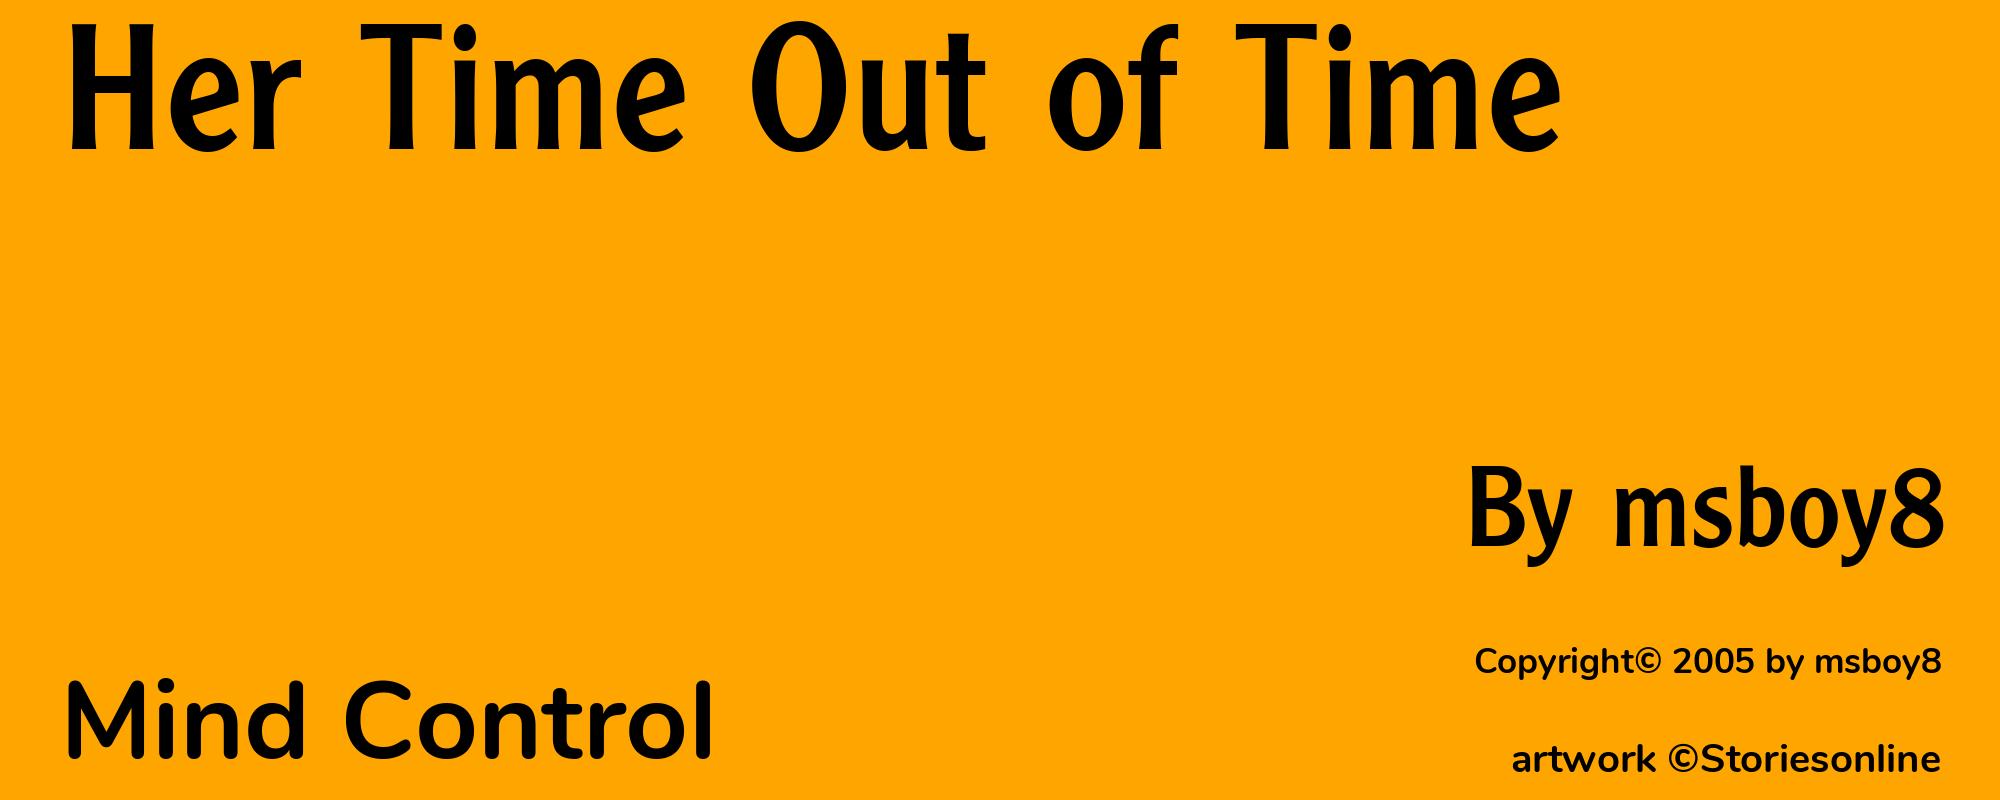 Her Time Out of Time - Cover